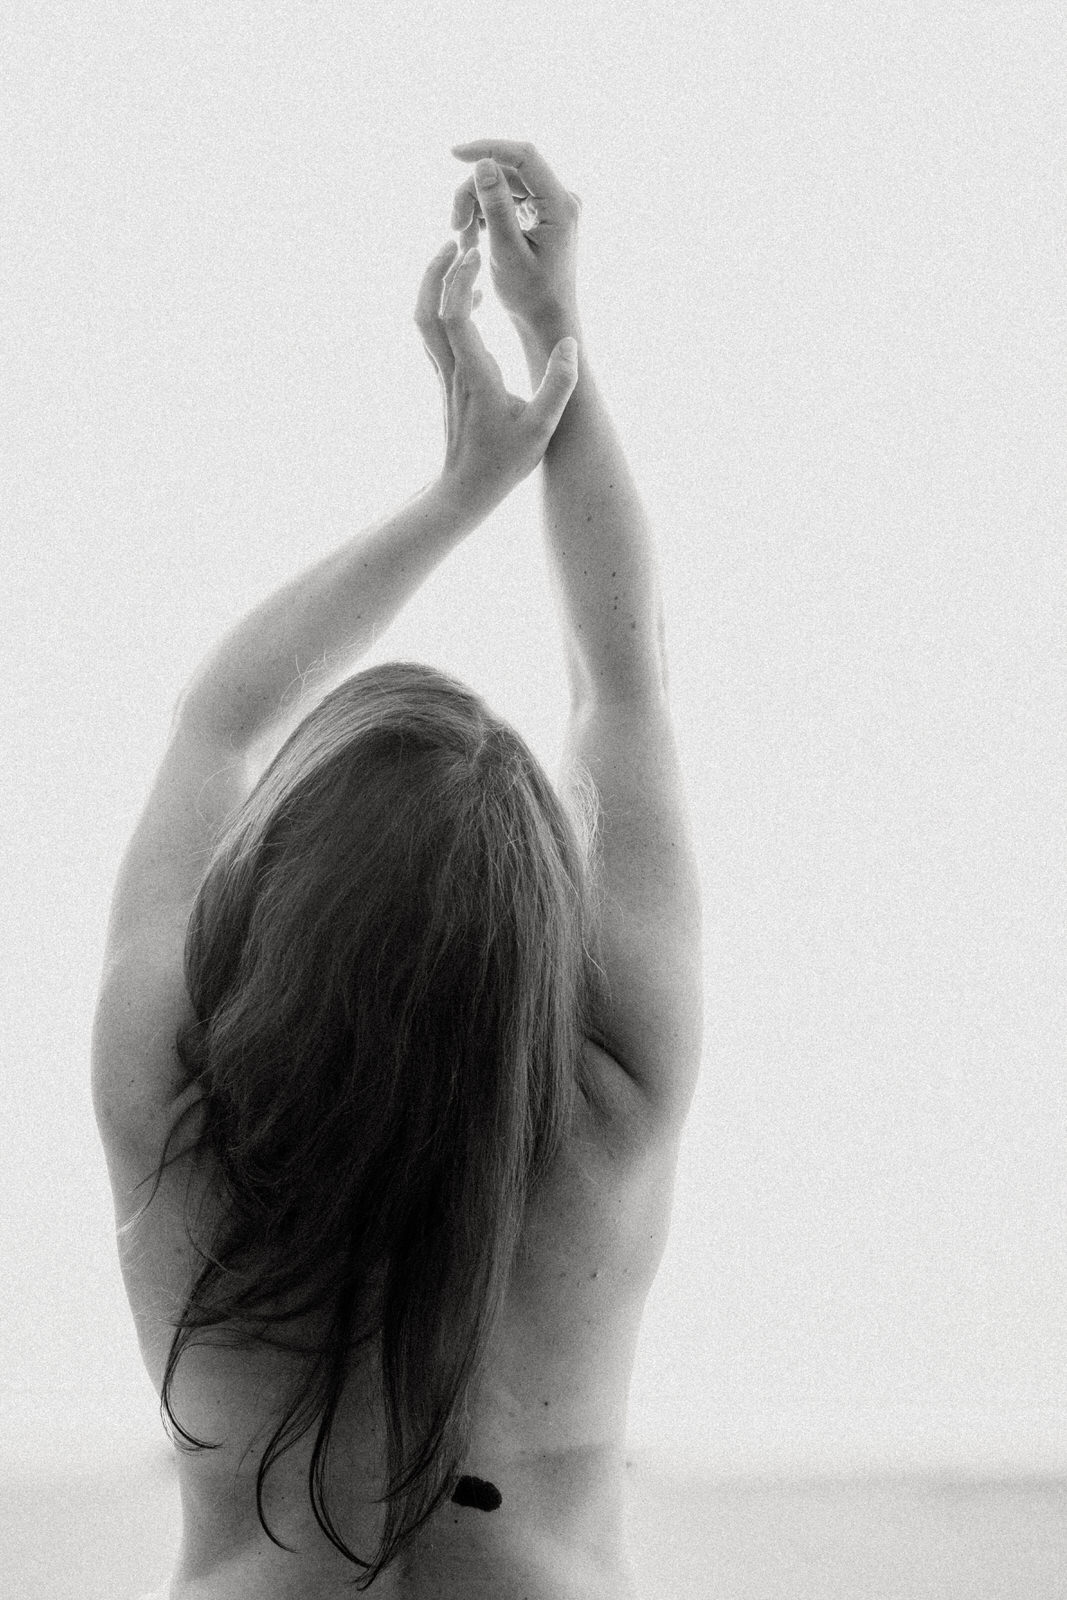 black and white fine art nude photo of a woman reaching up above head with hair falling down her back